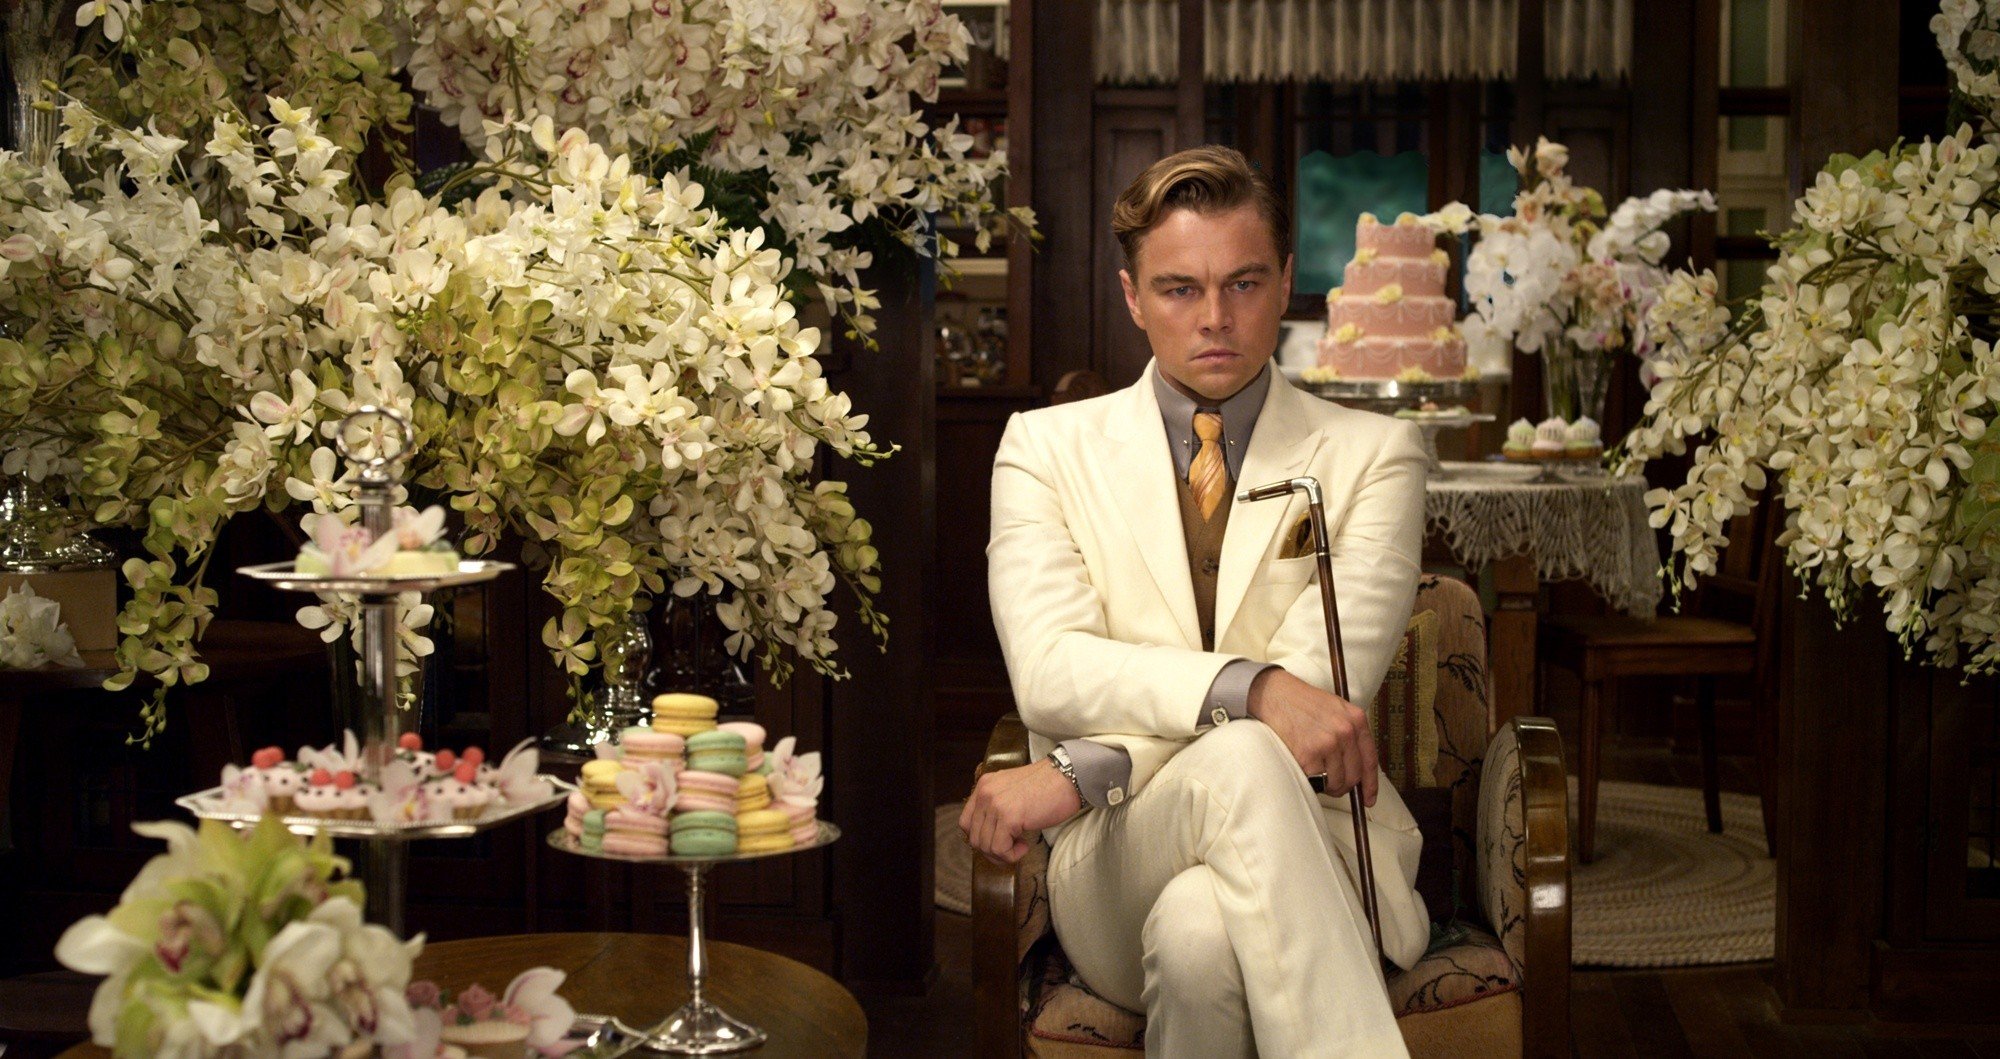 Leonardo DiCaprio stars as Jay Gatsby in Warner Bros. Pictures' The Great Gatsby (2013)